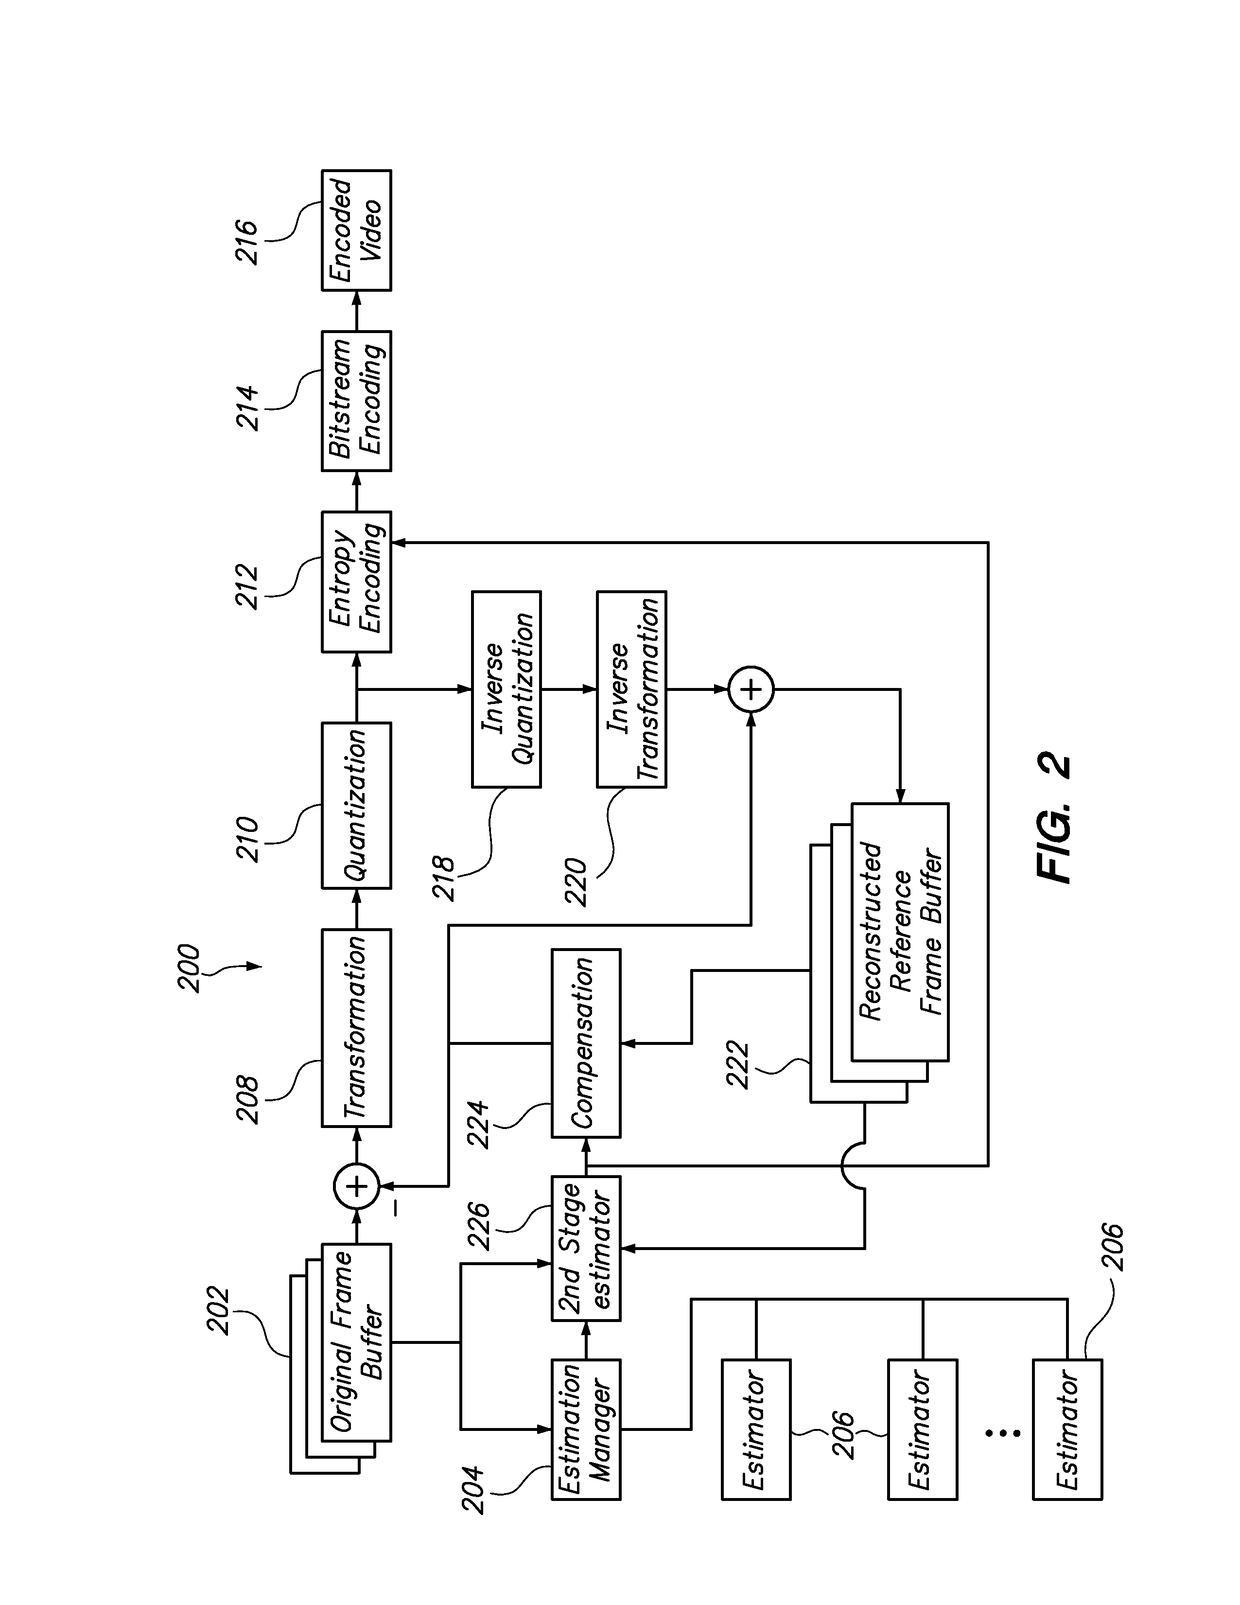 Method and system for parallelizing video compression